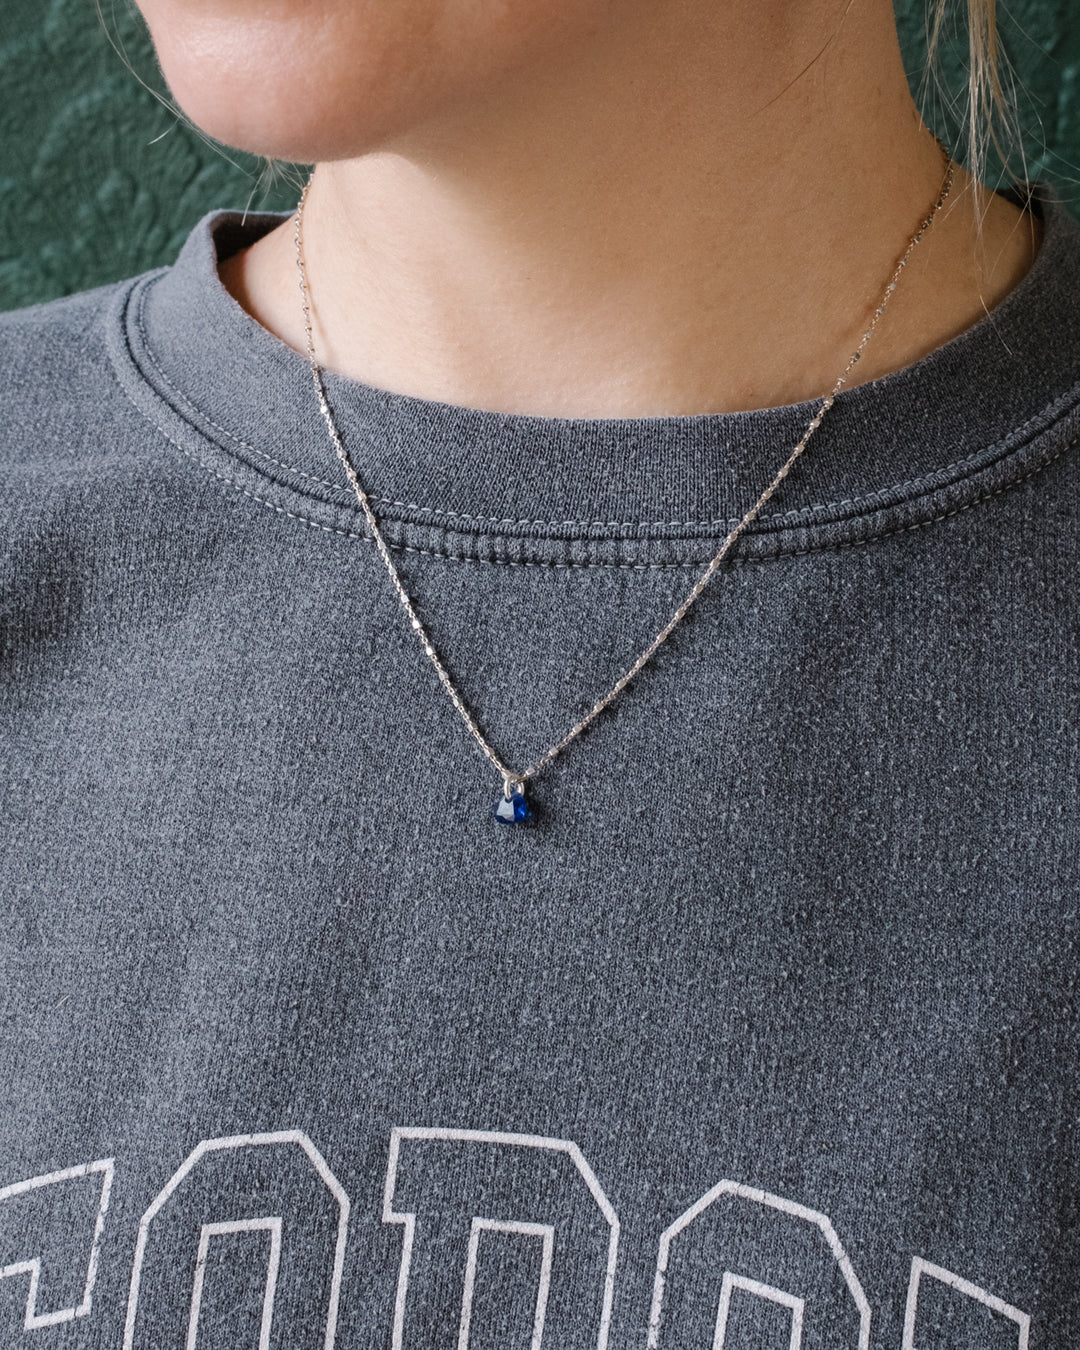 Mini Blue Sapphire Heart Necklace - The Healing Pear